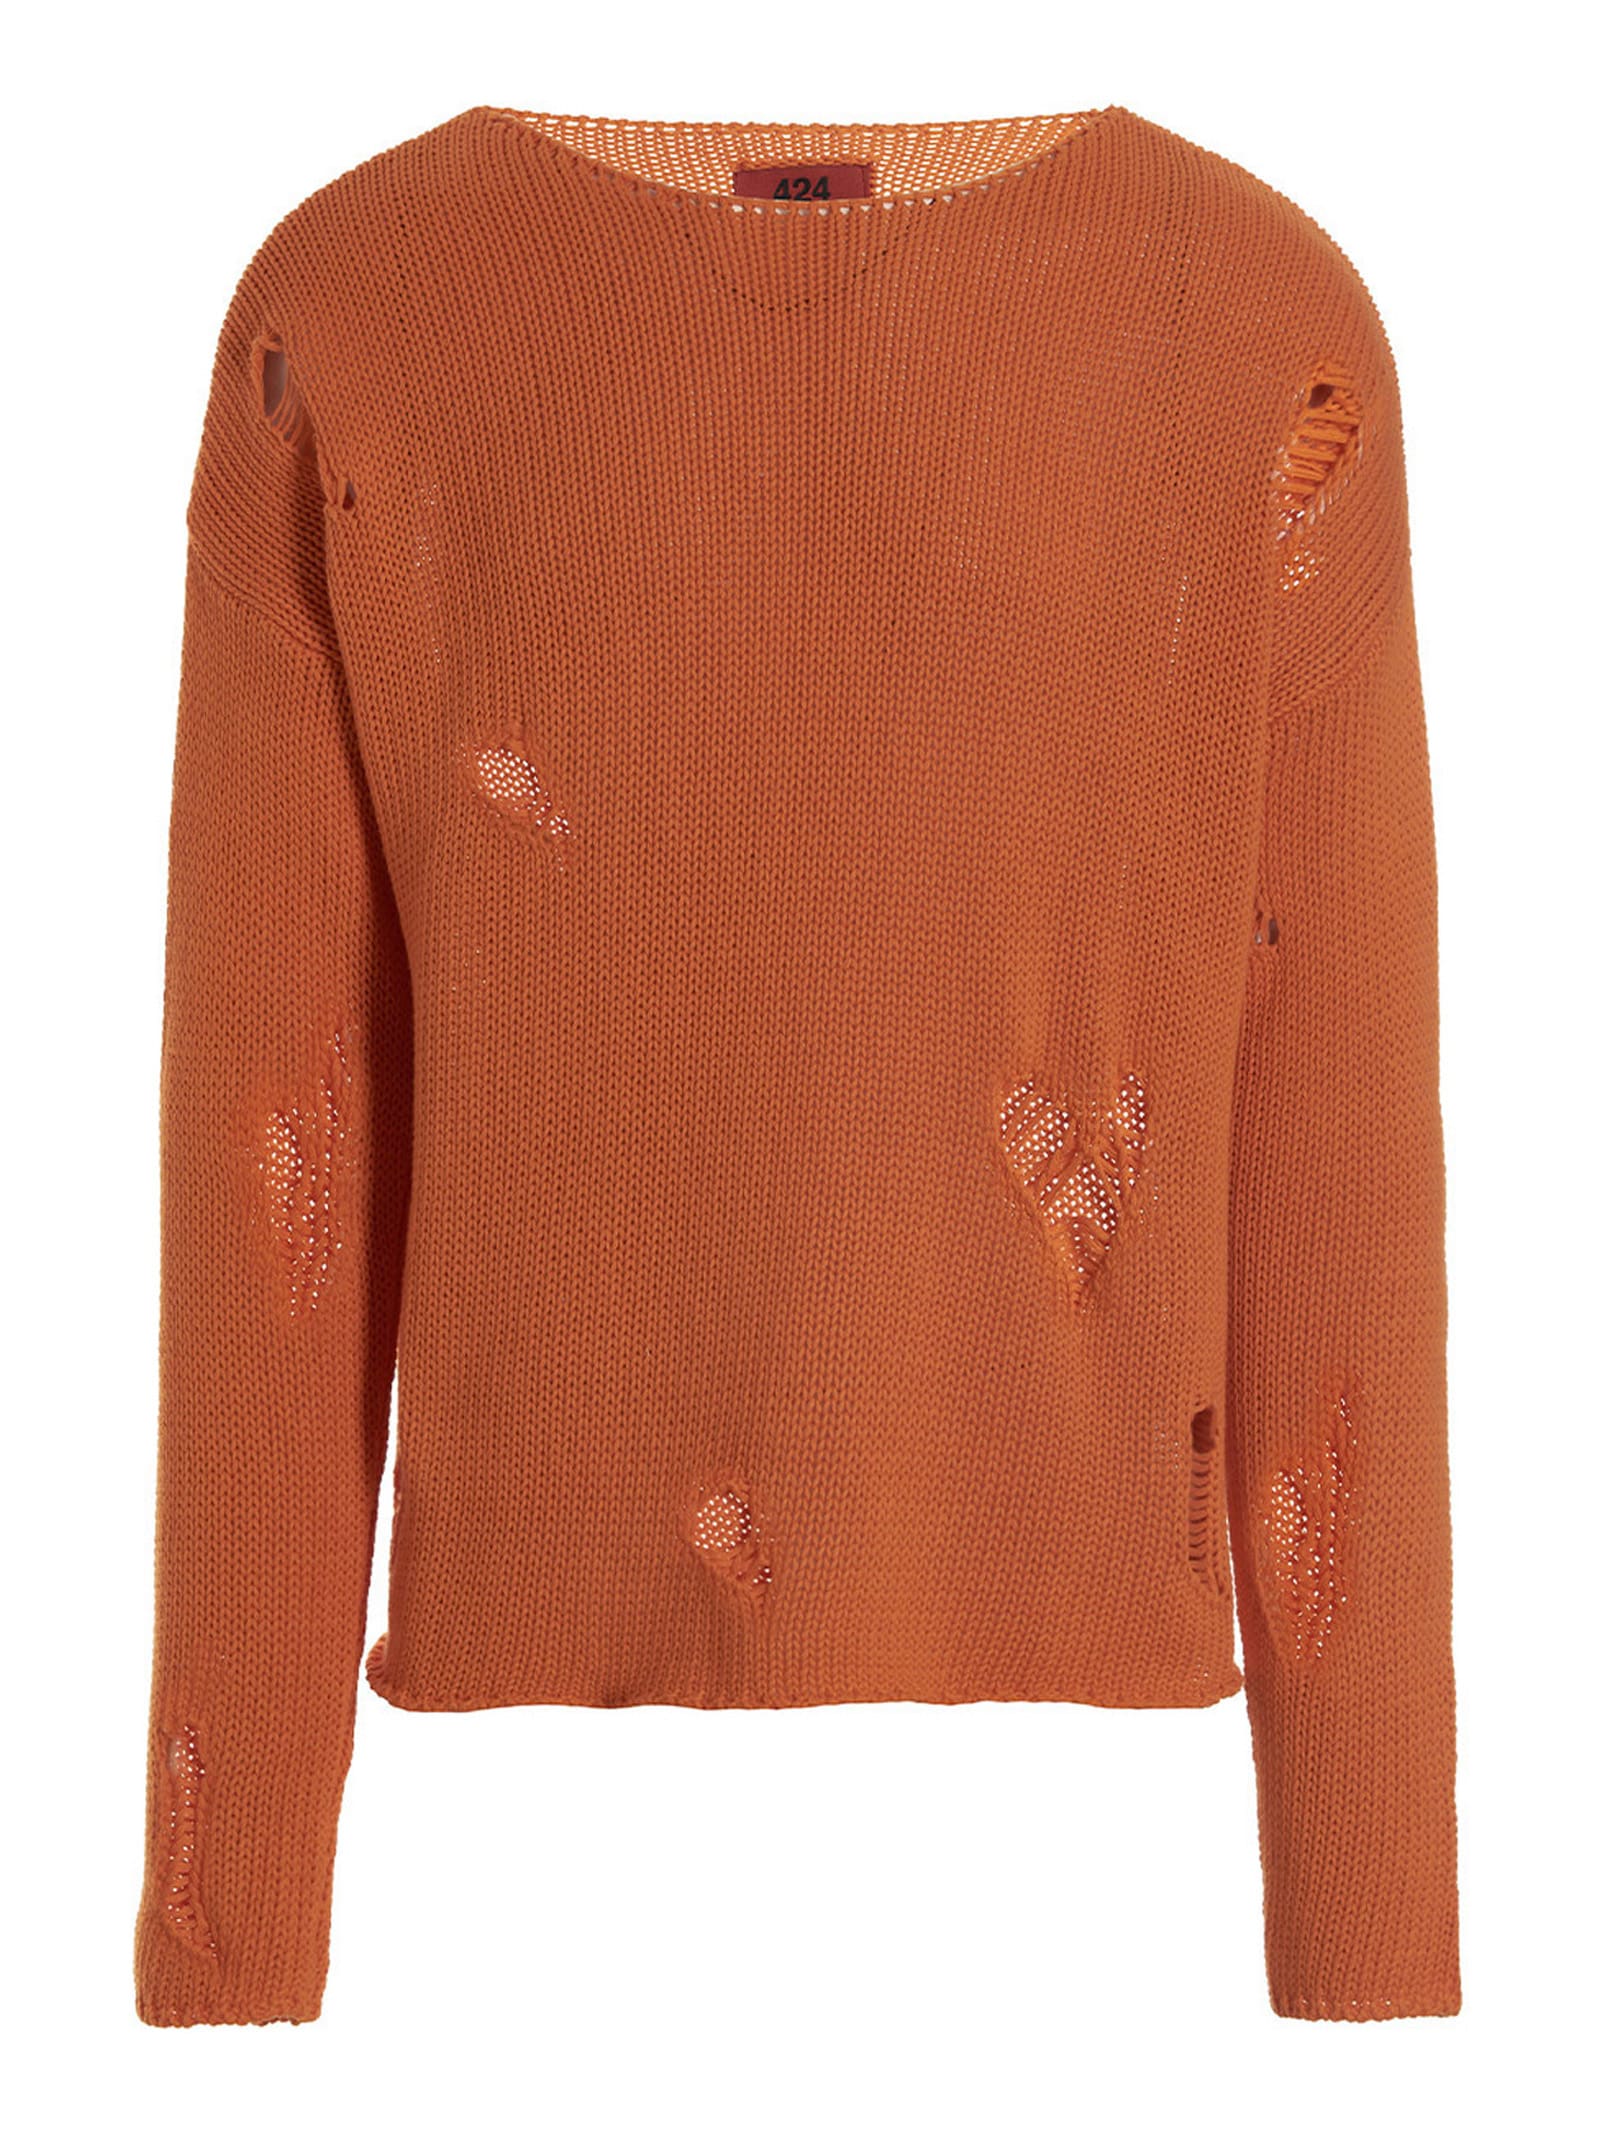 FourTwoFour on Fairfax Crackle Detail Sweater